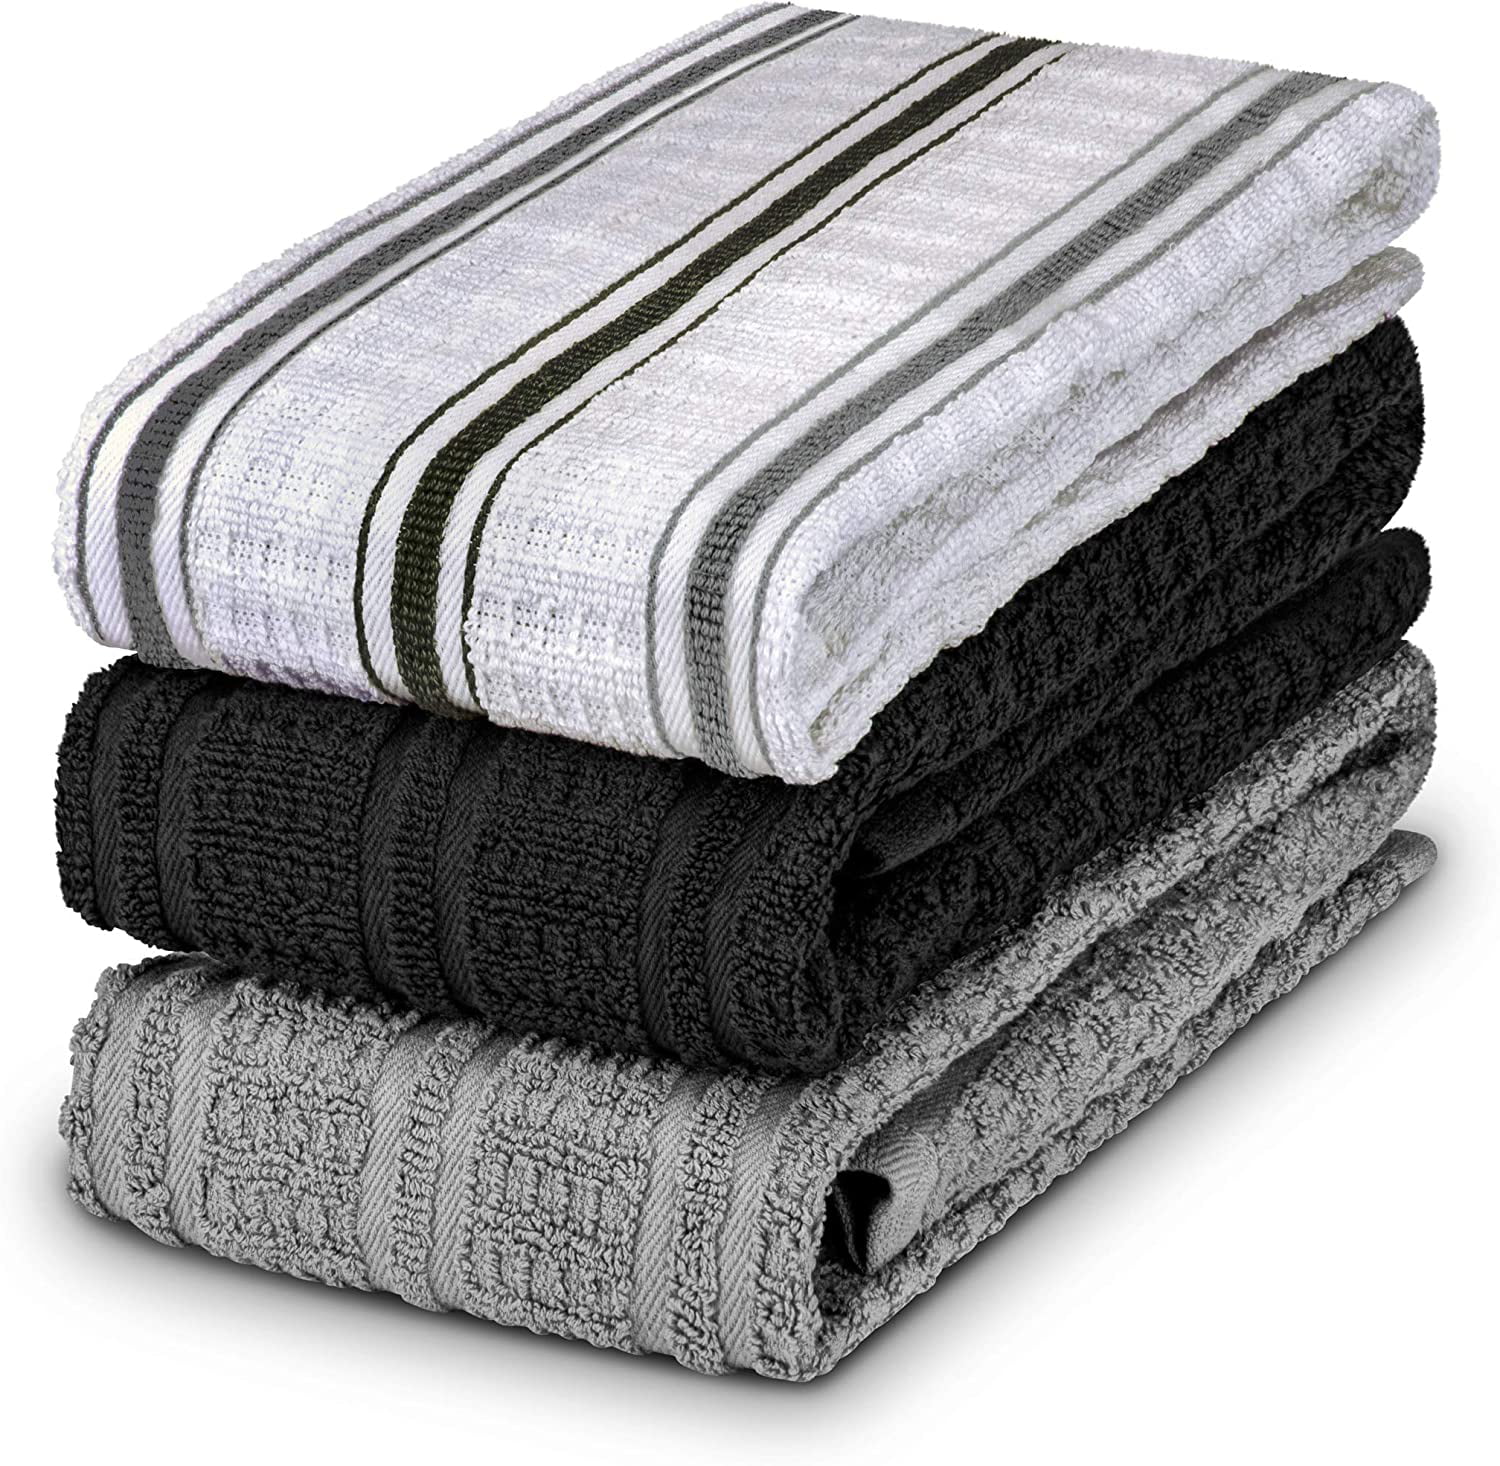 DecorRack 4 Pack Large Kitchen Towels, 100% Cotton, 15 x 25 Inch Absorbent  Dish Drying Cloth, Perfect for Kitchen, Hand Towels, Assorted Colors (Set